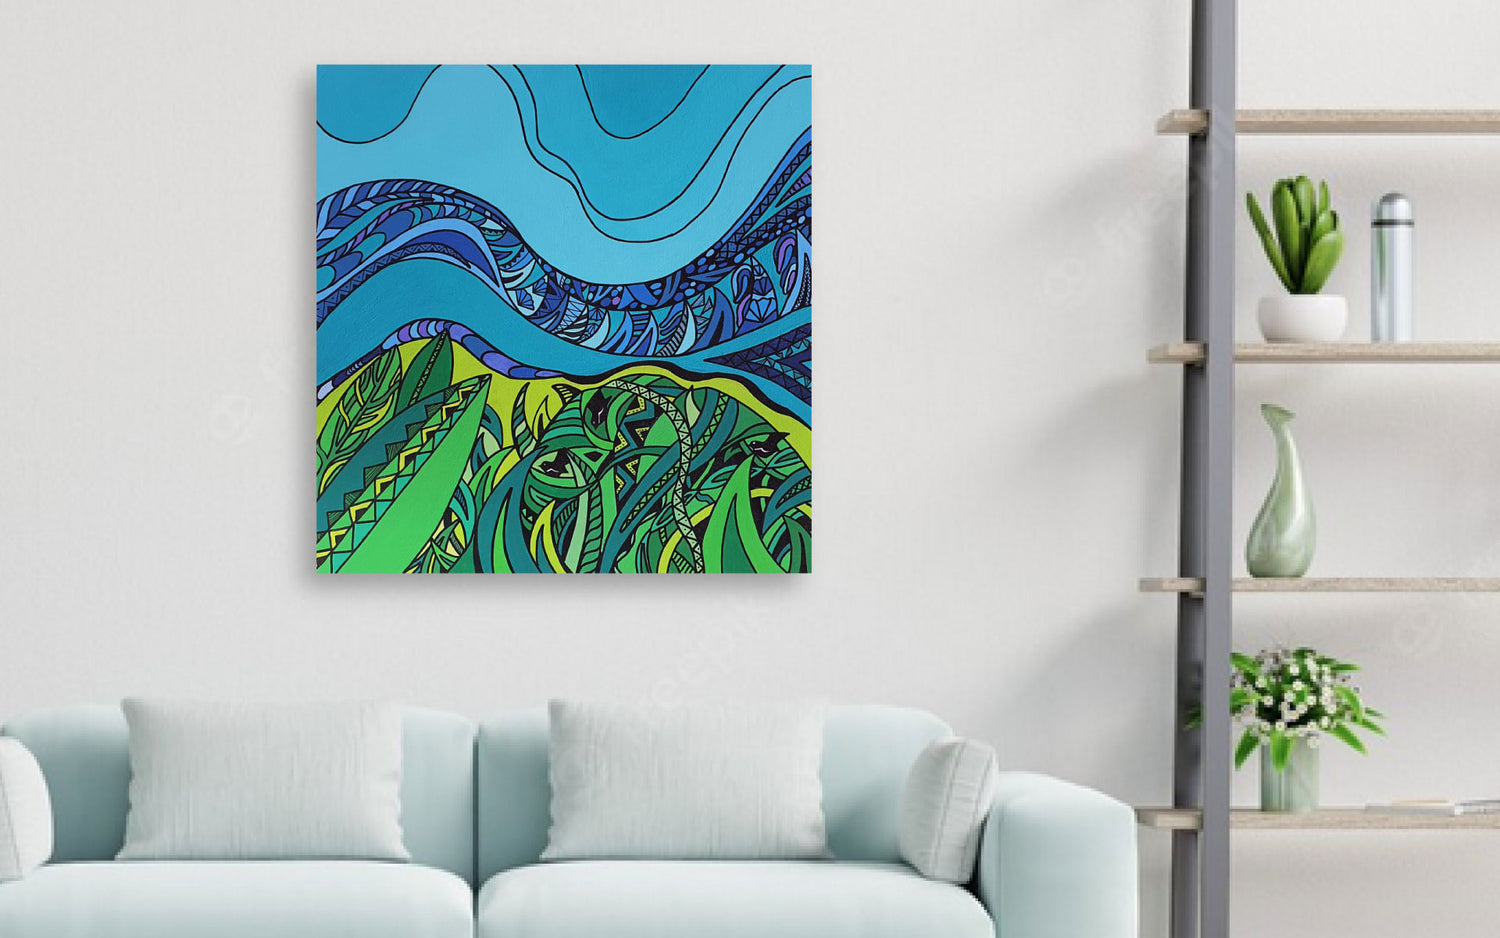 New Zealand inspired abstract art by Nicky Lowe